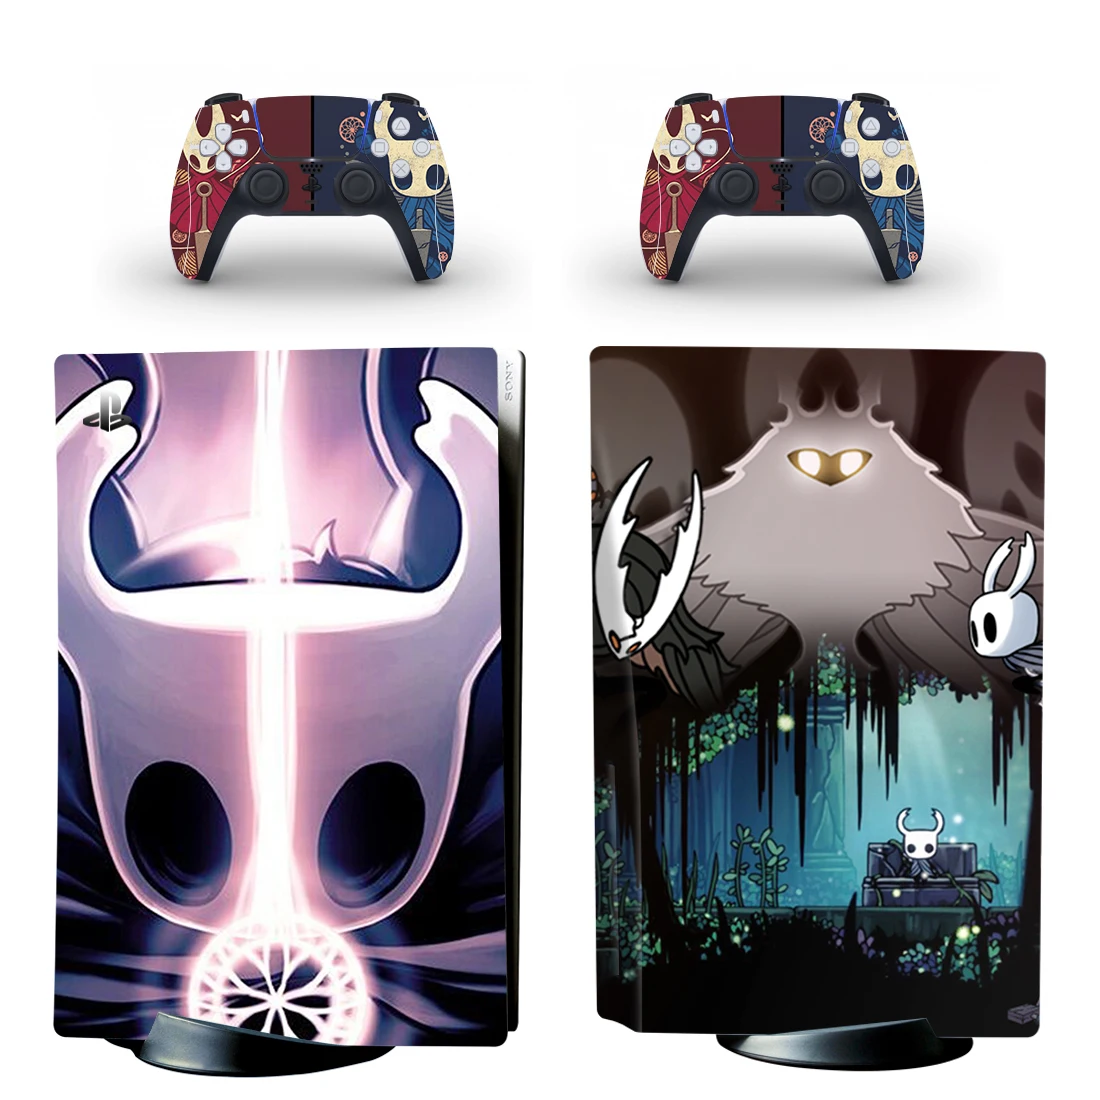 Knight ps5. Hollow Knight ps4 диск. Виниловые наклейки на ps5. Outriders ps5 диск. Hollow Knight геймпад.